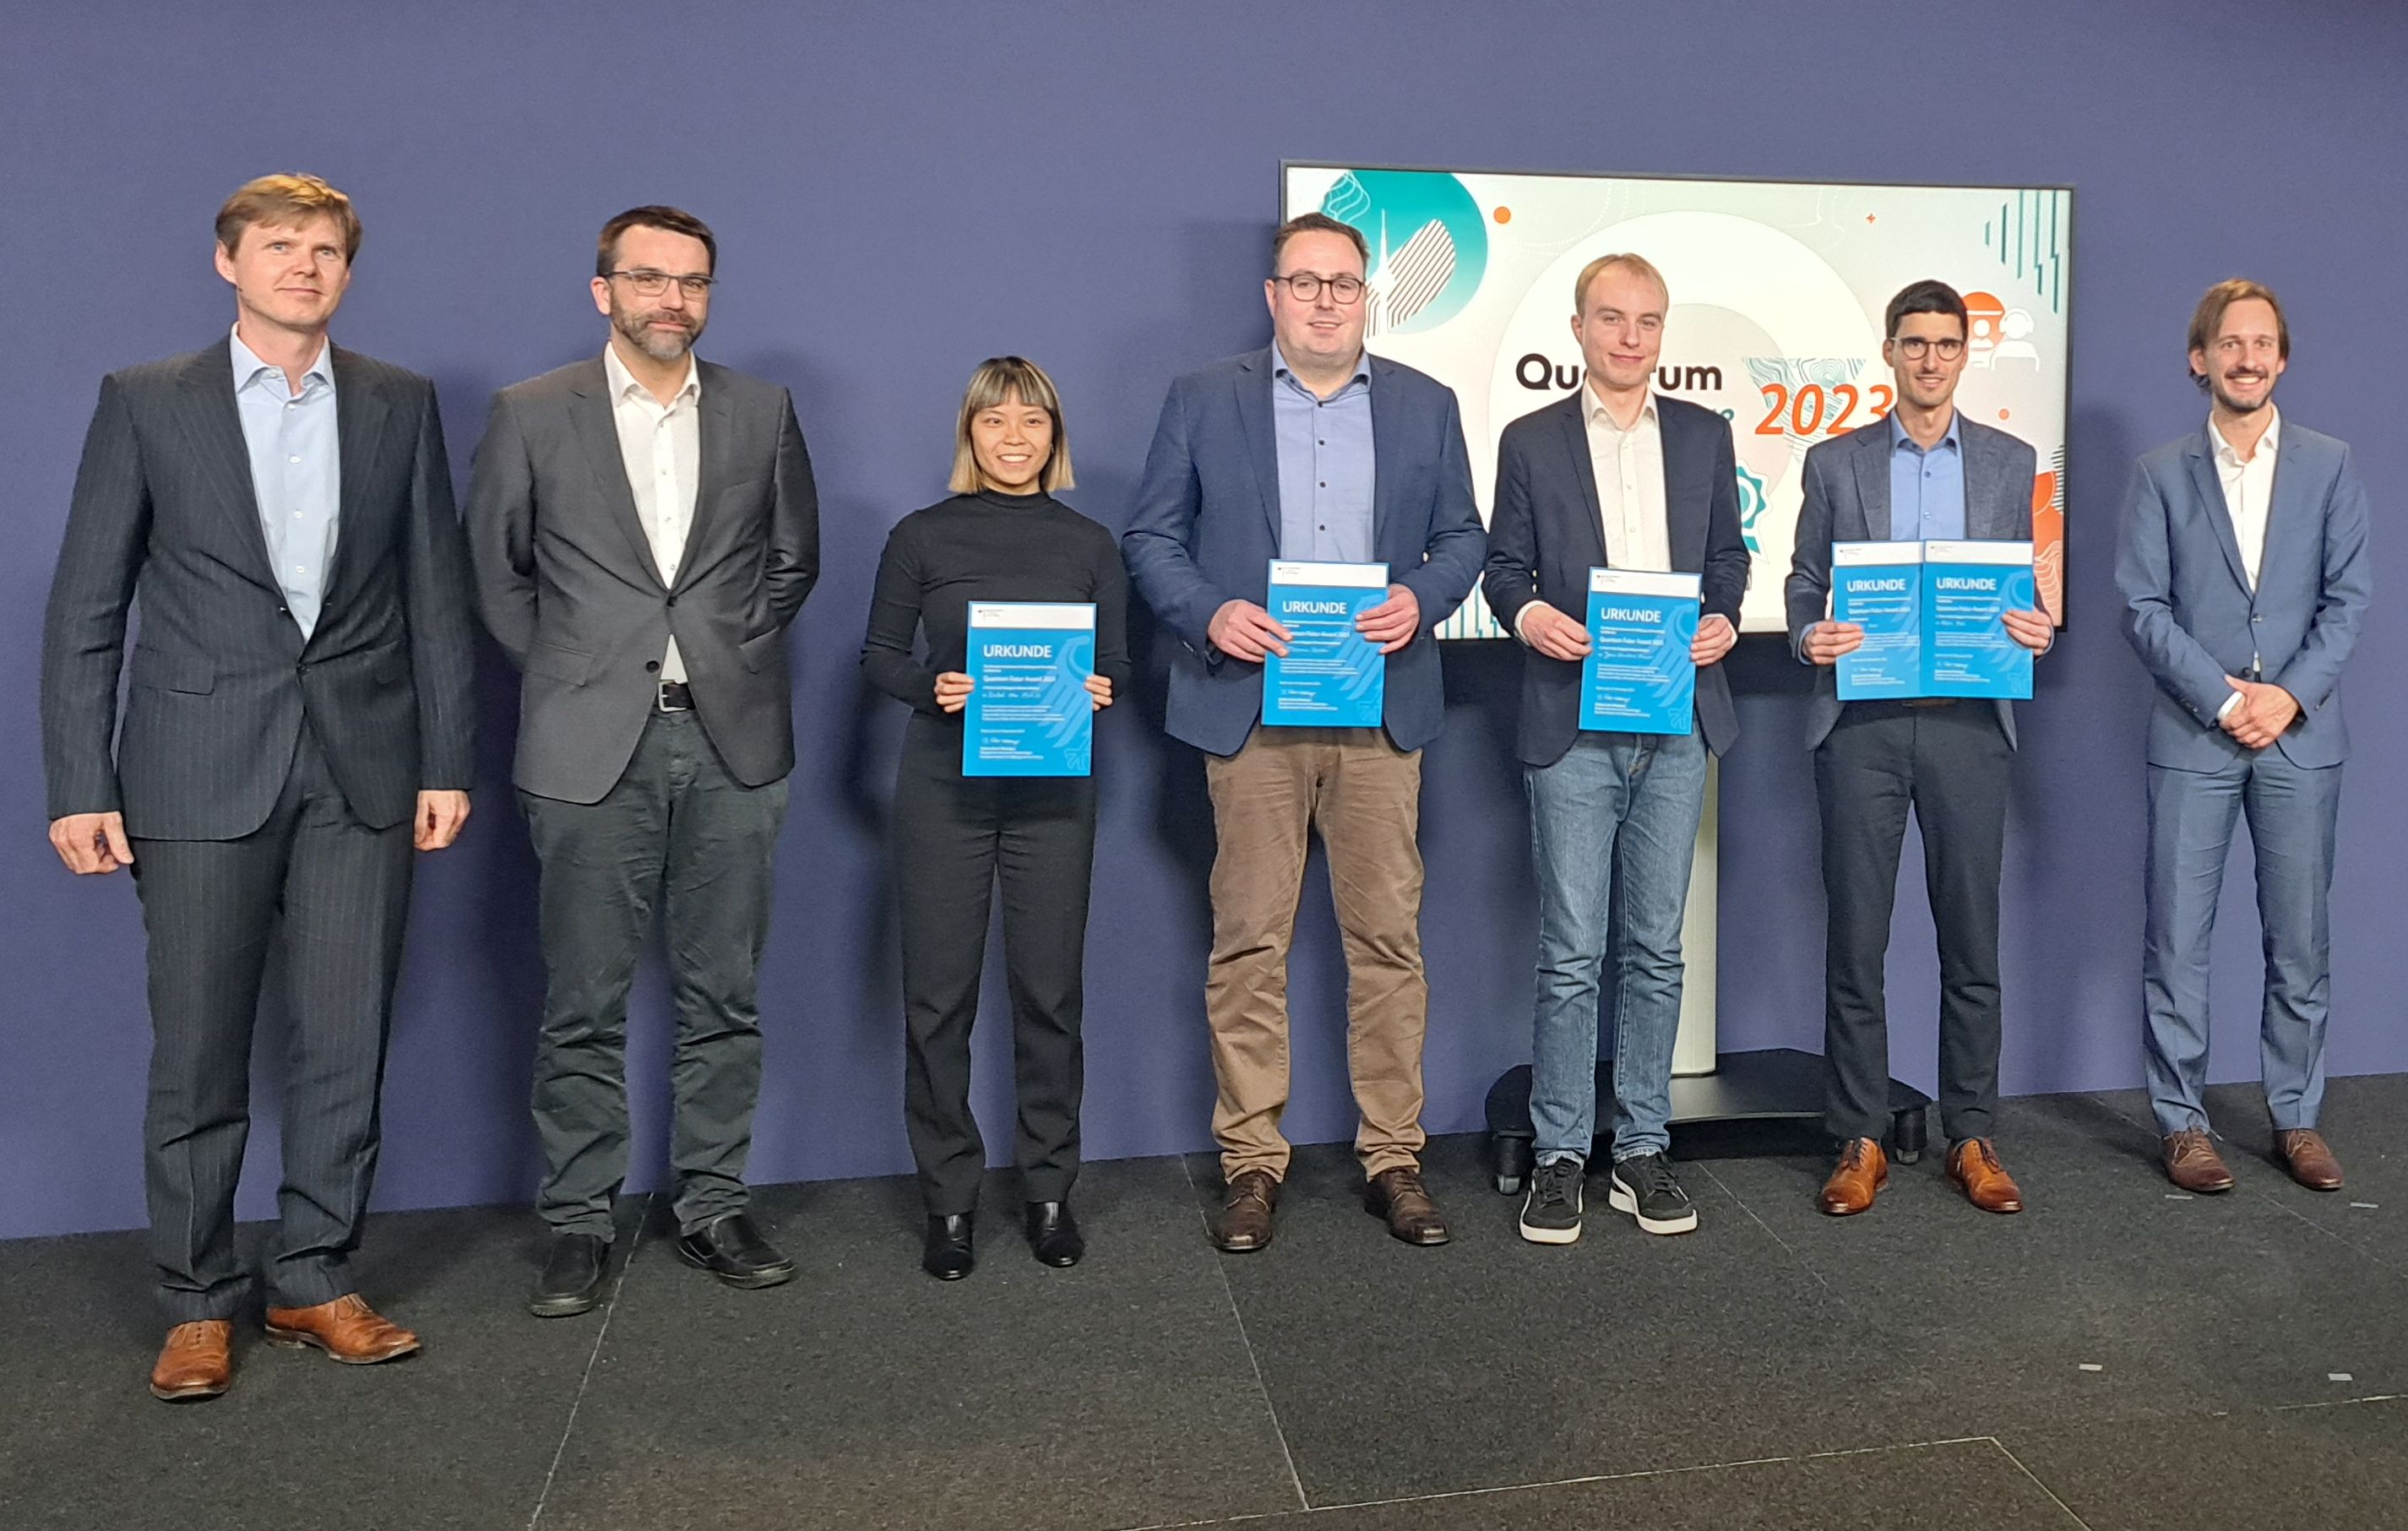 Dr. Felix Hahl (2nd from right, Fraunhofer IAF and University of Freiburg) with Dr. Max Riedel (ZEISS Innovation Hub @ KIT, jury), Dr. Sebastian Blatt (planqc, jury), Isabel Nha Minh Le (RWTH Aachen University, 2nd place Master), Dr. Thomas Gerster (TU Braunschweig, 2nd place PhD), Jens-Christian Drawer (University of Oldenburg, 1st place Master) and Dr. Wolfgang Müssel (Federal Ministry of Education and Research, jury) at the award ceremony in Berlin